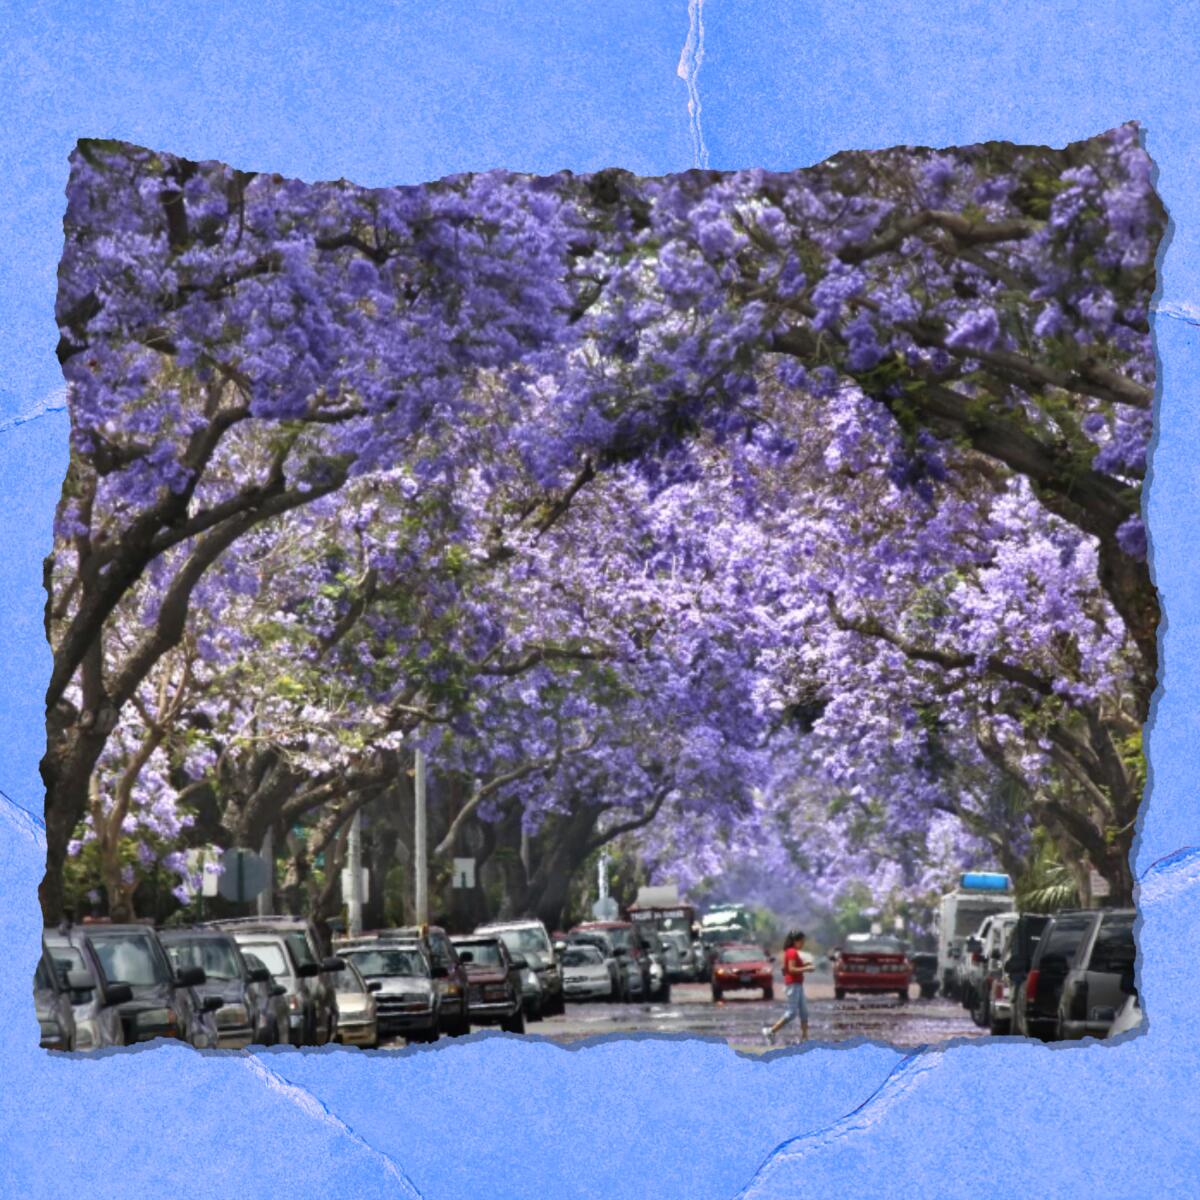 Trees border a city street. The boughs, covered heavily in purple blossoms, meet in the middle to form a canopy.